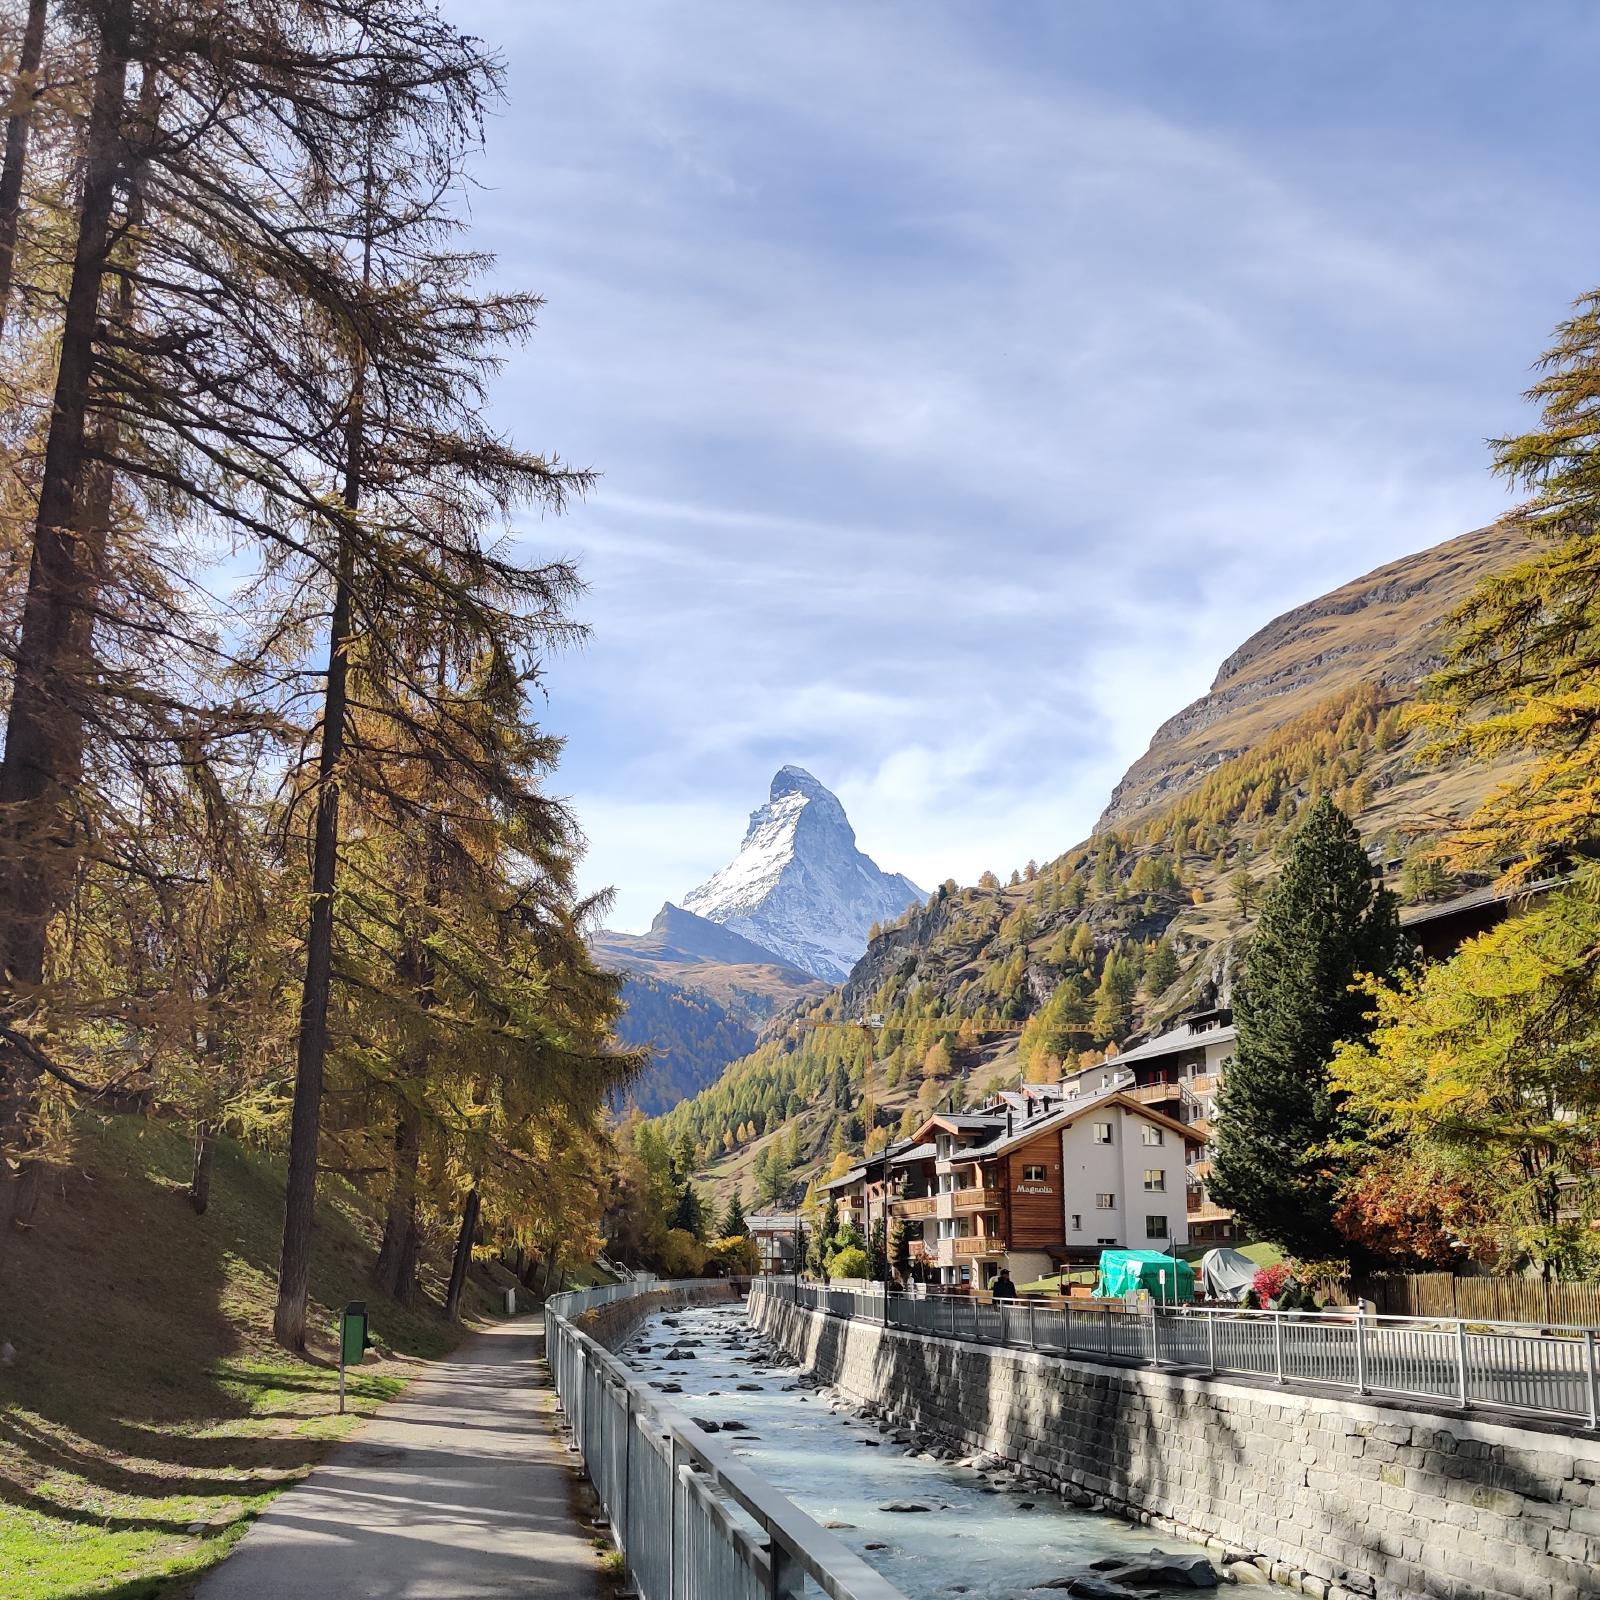 Taken looking South in Zermatt with the river in the foreground and the Matterhorn in the background during fall